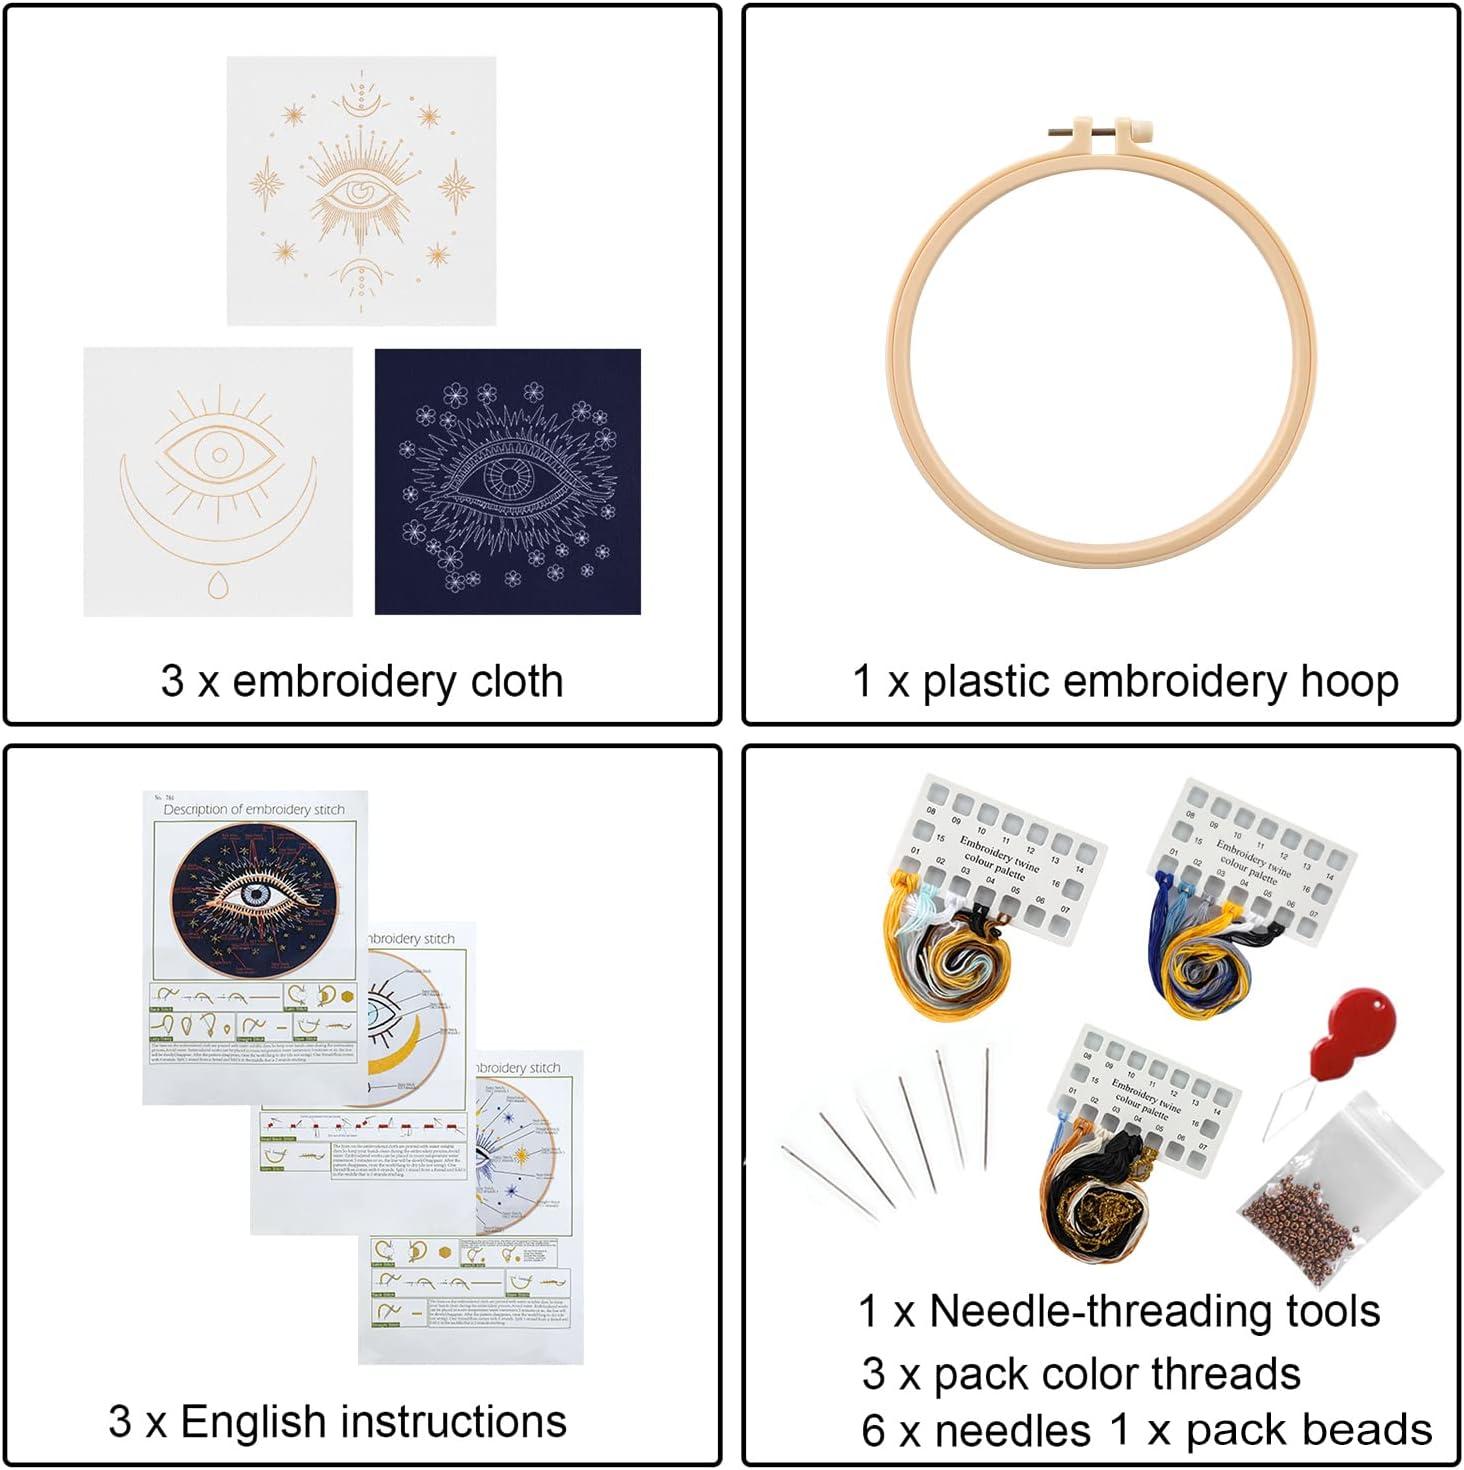 Sewing Embroidery Supplies, Repair Accessories, Evil Eye Patches